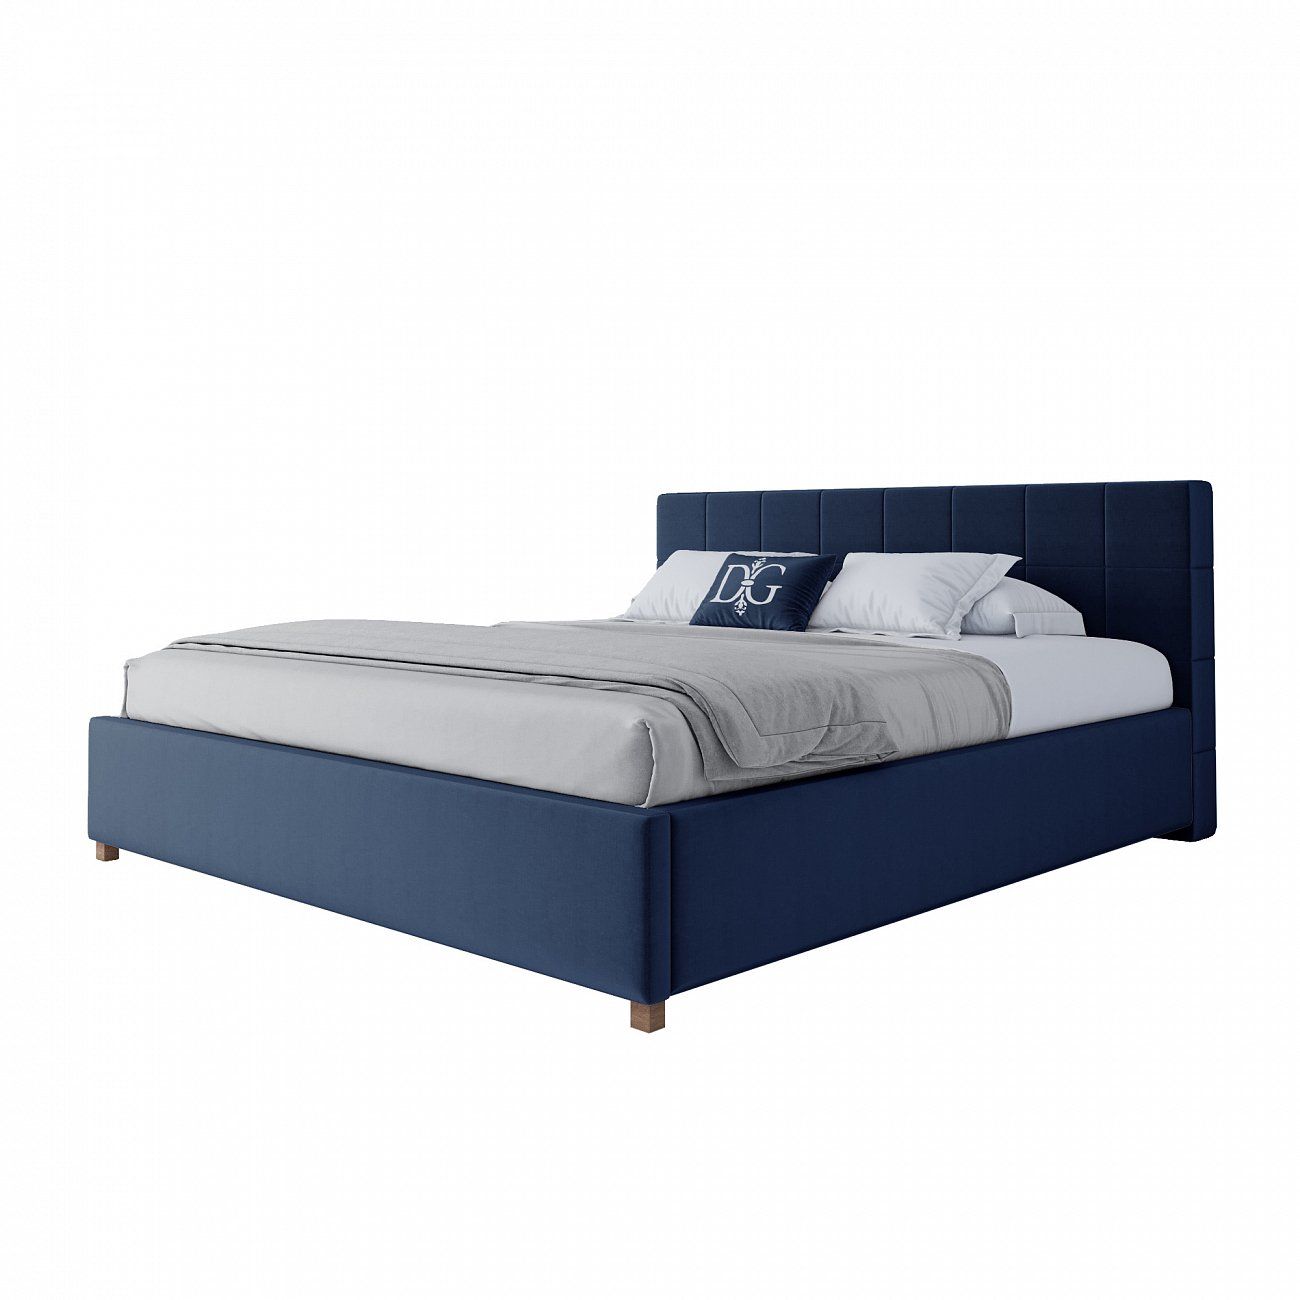 Double bed 180x200 blue Wales